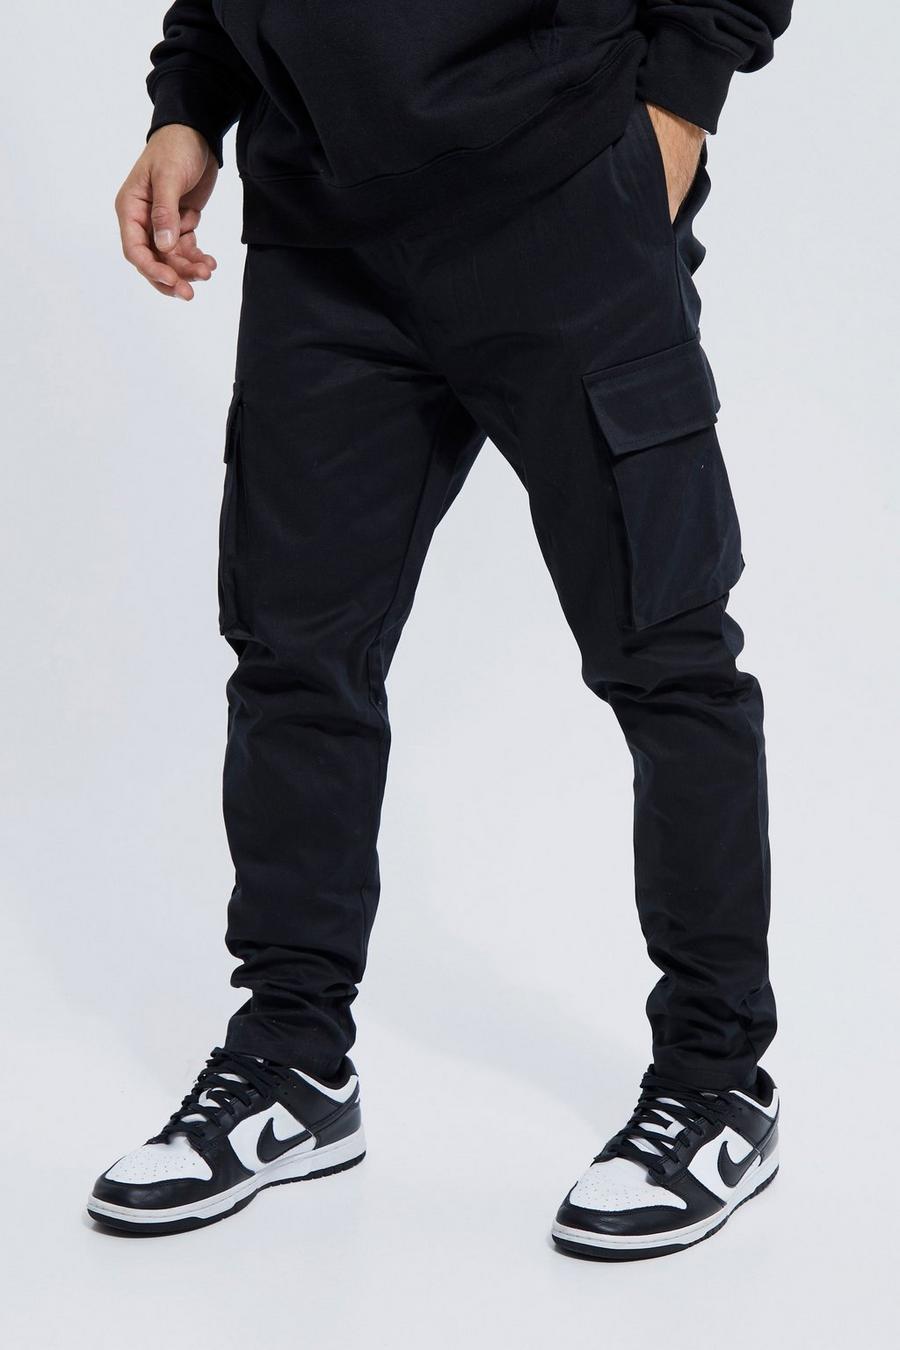 Floleo Men Flap Pocket Drawstring Elastic Waist Cargo Pants Straight-Fit  Casual Pants Solid Trousers Relaxed Plus Size Long Pant 